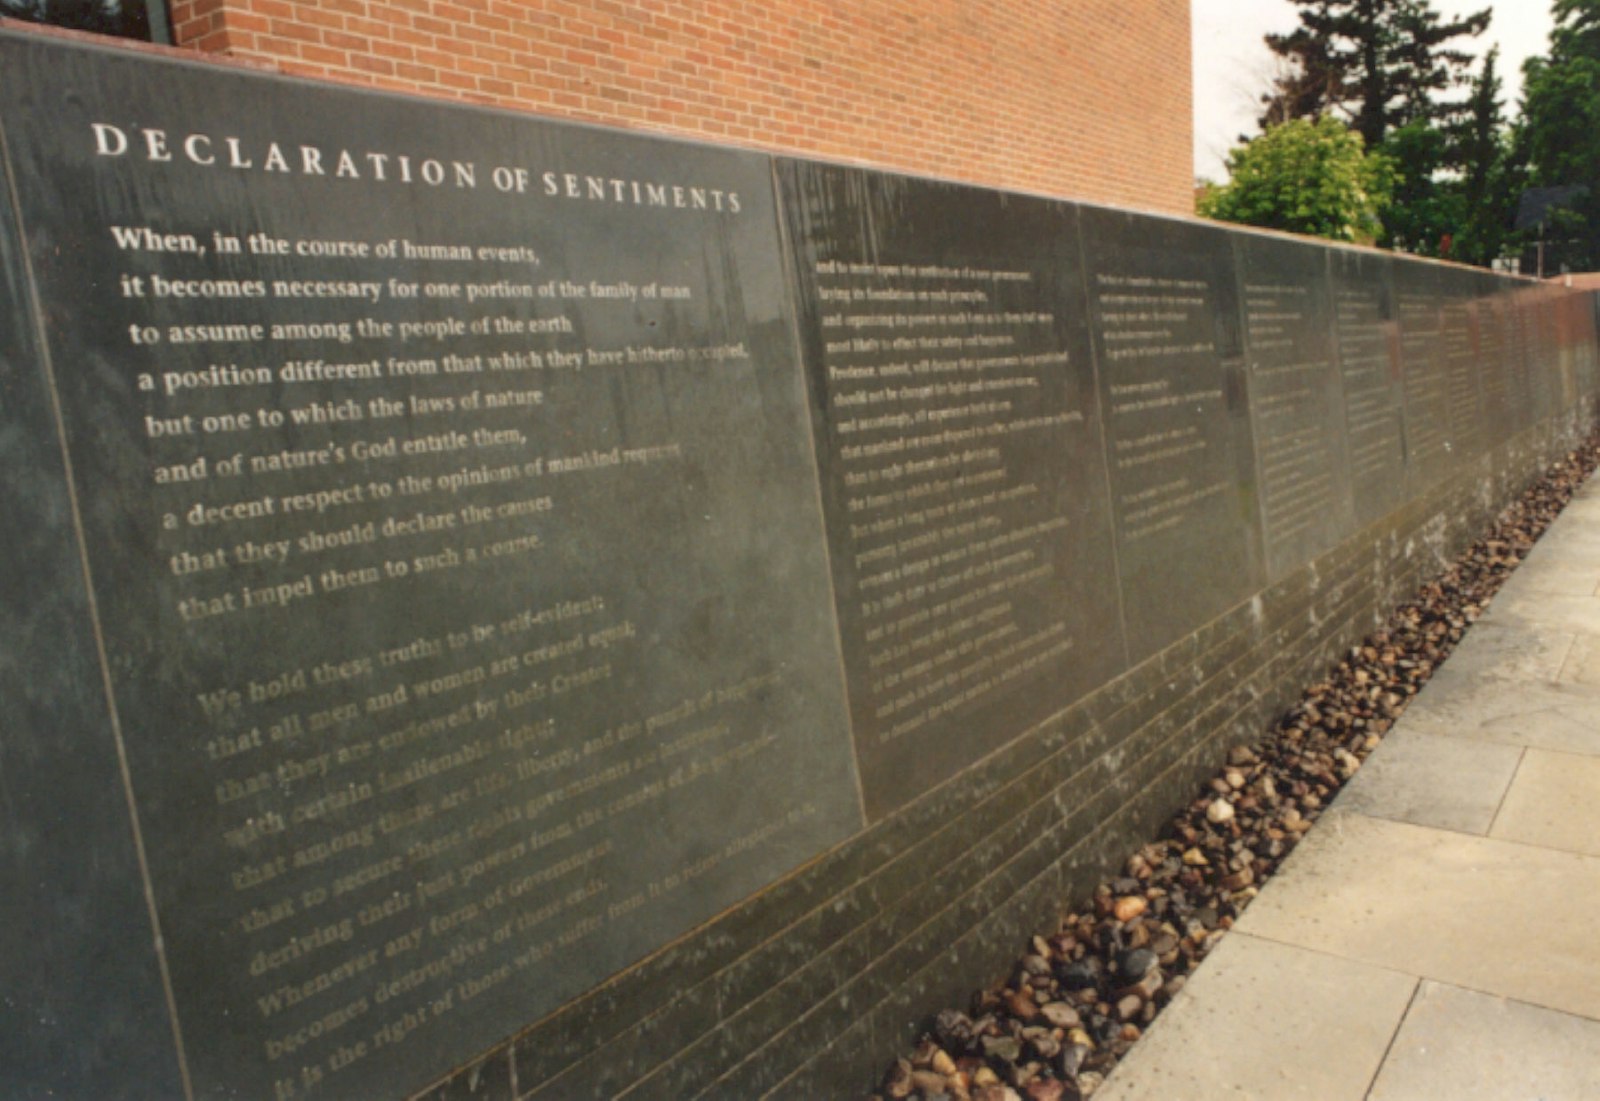 Stone wall inscribed with the Declaration of Sentiments